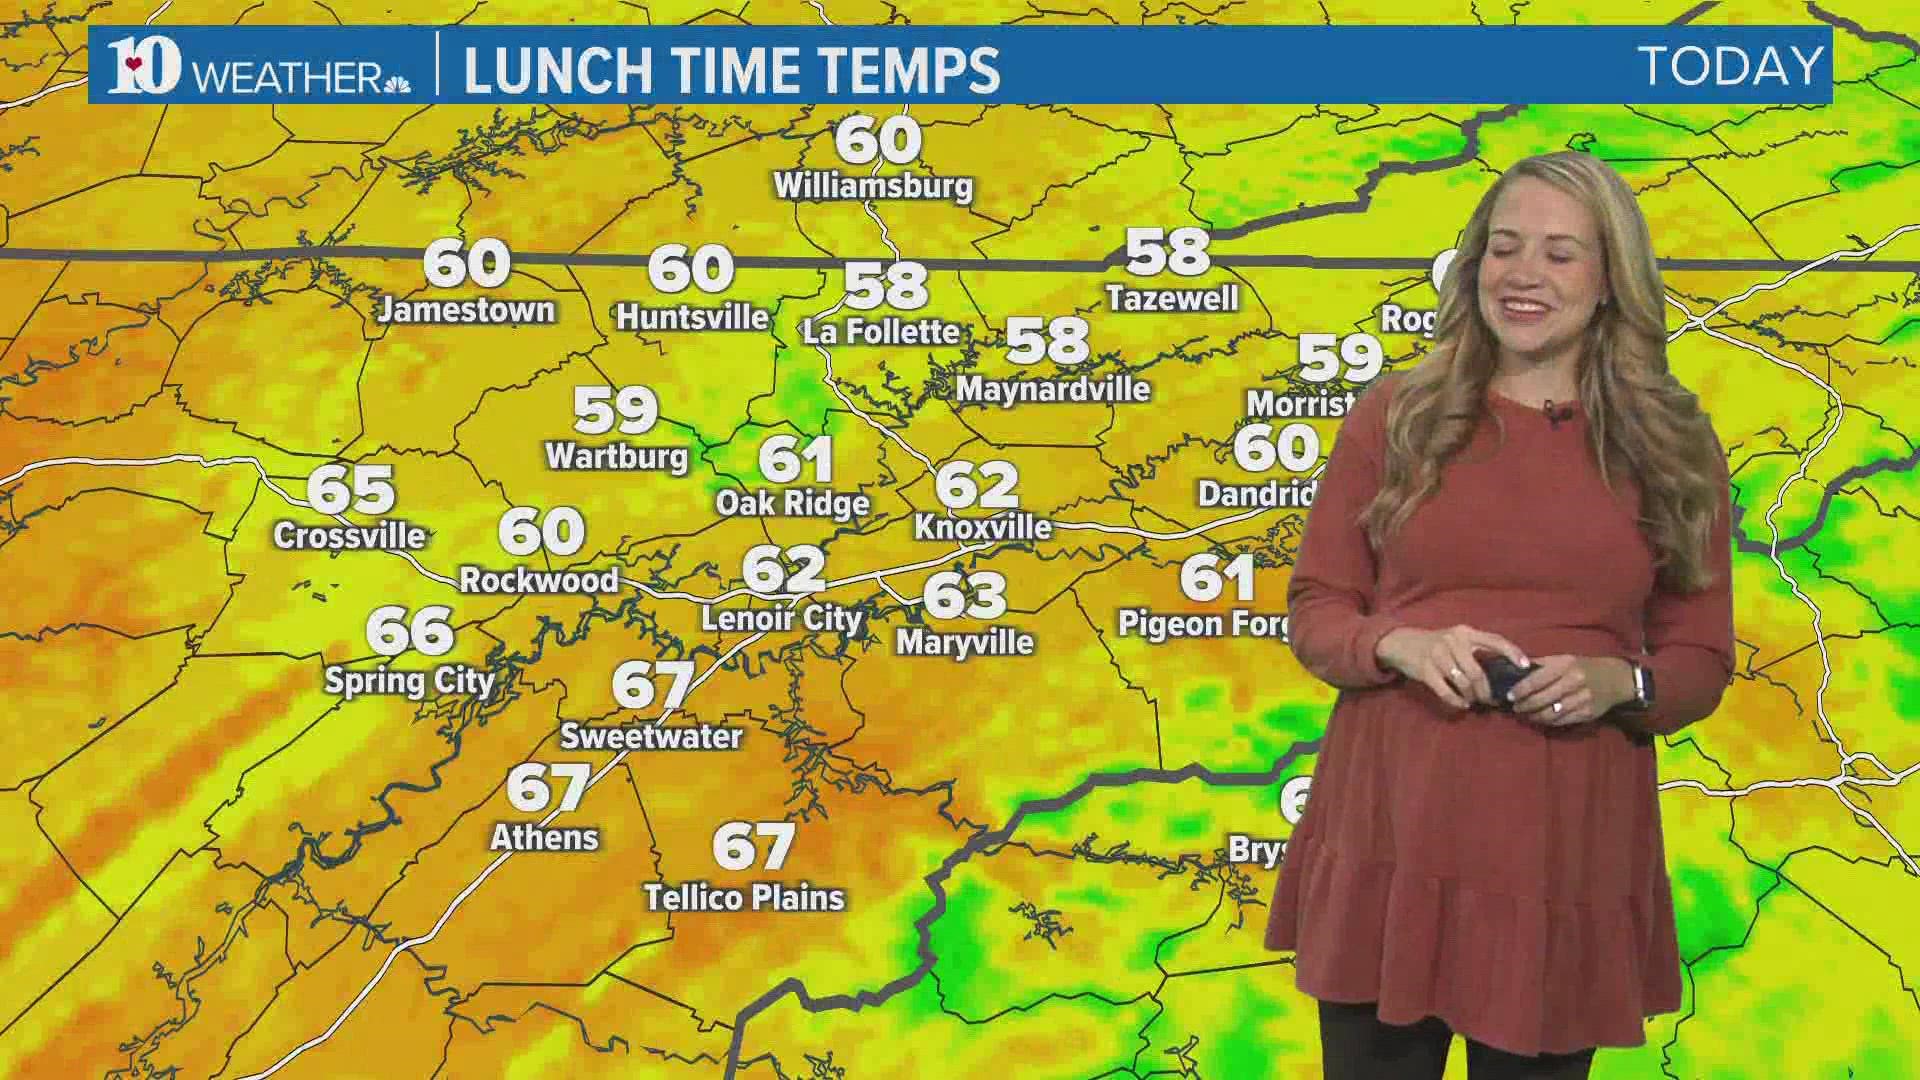 Partly cloudy skies with highs in the upper 70s